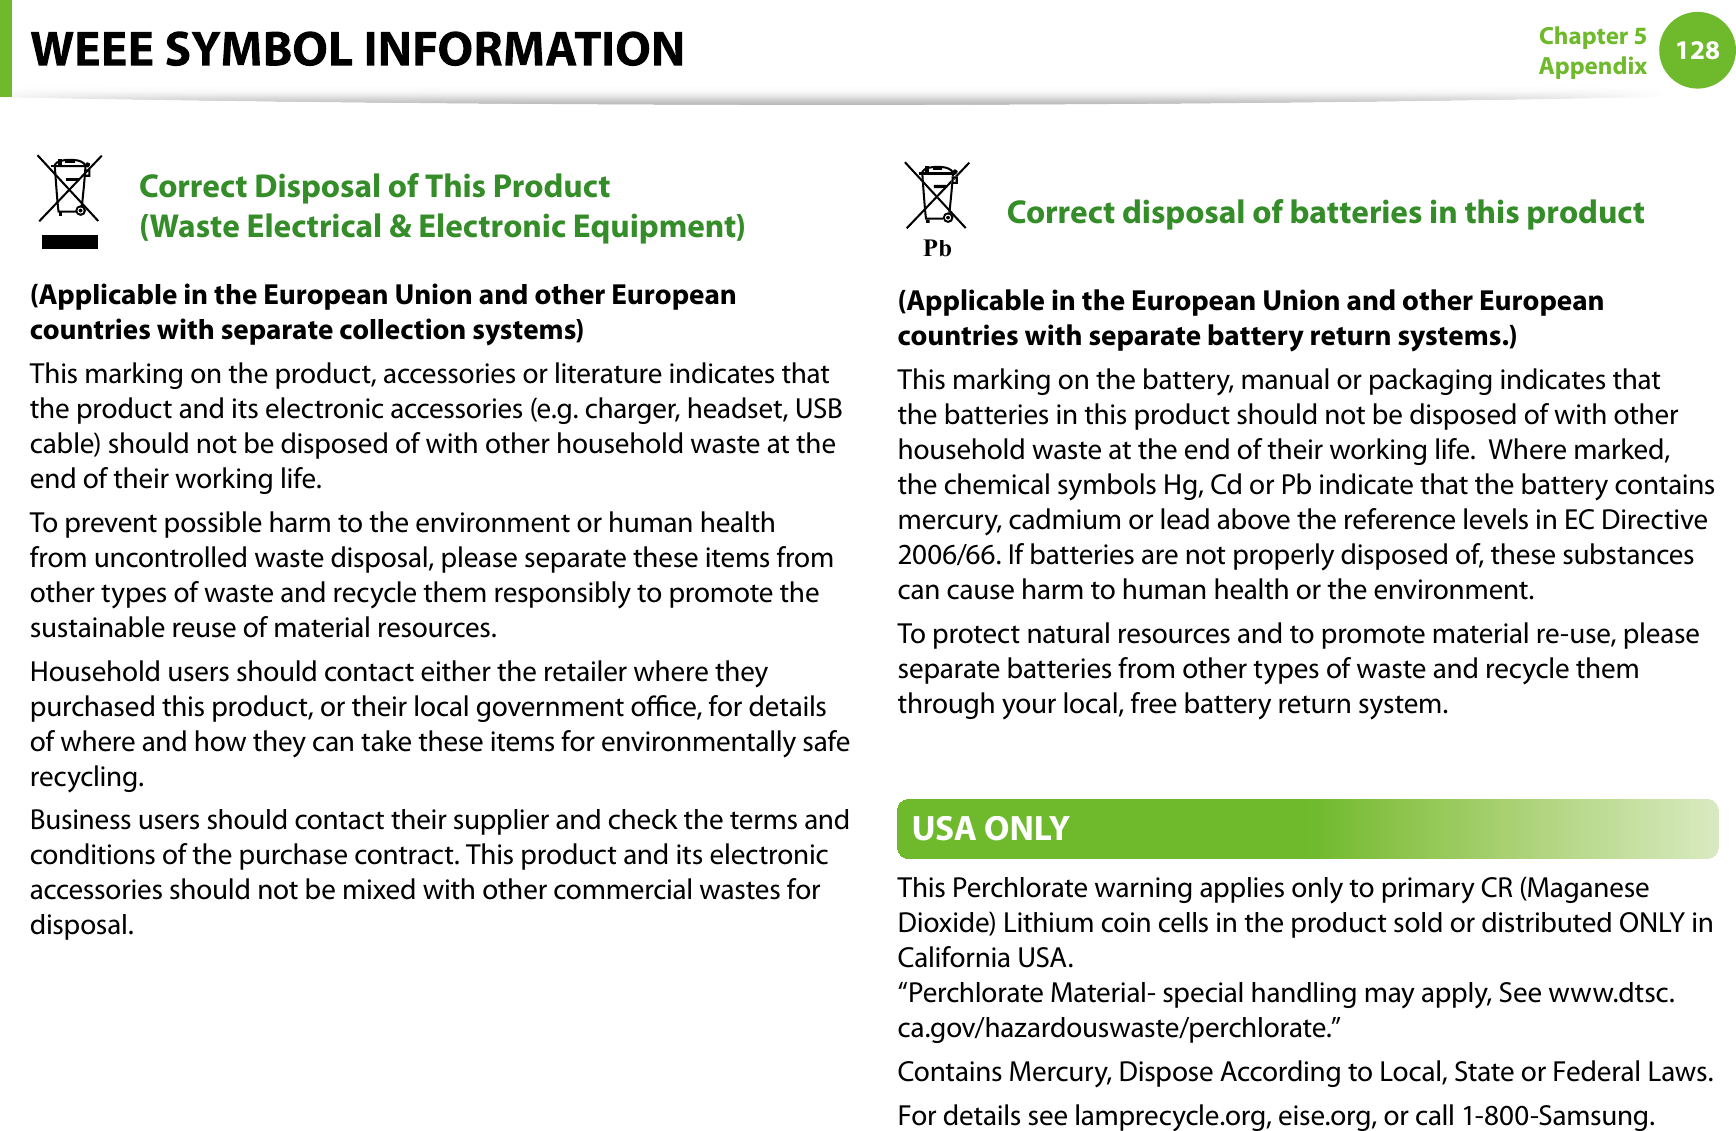 128Chapter 5AppendixCorrect Disposal of This Product (Waste Electrical &amp; Electronic Equipment)(Applicable in the European Union and other Europeancountries with separate collection systems)This marking on the product, accessories or literature indicates thatthe product and its electronic accessories (e.g. charger, headset, USBcable) should not be disposed of with other household waste at theend of their working life.To prevent possible harm to the environment or human healthfrom uncontrolled waste disposal, please separate these items fromother types of waste and recycle them responsibly to promote thesustainable reuse of material resources.Household users should contact either the retailer where theypurchased this product, or their local government oce, for detailsof where and how they can take these items for environmentally saferecycling.Business users should contact their supplier and check the terms andconditions of the purchase contract. This product and its electronicaccessories should not be mixed with other commercial wastes fordisposal.PbCorrect disposal of batteries in this product(Applicable in the European Union and other Europeancountries with separate battery return systems.)This marking on the battery, manual or packaging indicates thatthe batteries in this product should not be disposed of with otherhousehold waste at the end of their working life.  Where marked,the chemical symbols Hg, Cd or Pb indicate that the battery containsmercury, cadmium or lead above the reference levels in EC Directive2006/66. If batteries are not properly disposed of, these substancescan cause harm to human health or the environment.To protect natural resources and to promote material re-use, pleaseseparate batteries from other types of waste and recycle themthrough your local, free battery return system.USA ONLYThis Perchlorate warning applies only to primary CR (MaganeseDioxide) Lithium coin cells in the product sold or distributed ONLY inCalifornia USA.“Perchlorate Material- special handling may apply, See www.dtsc.ca.gov/hazardouswaste/perchlorate.”Contains Mercury, Dispose According to Local, State or Federal Laws.For details see lamprecycle.org, eise.org, or call 1-800-Samsung.